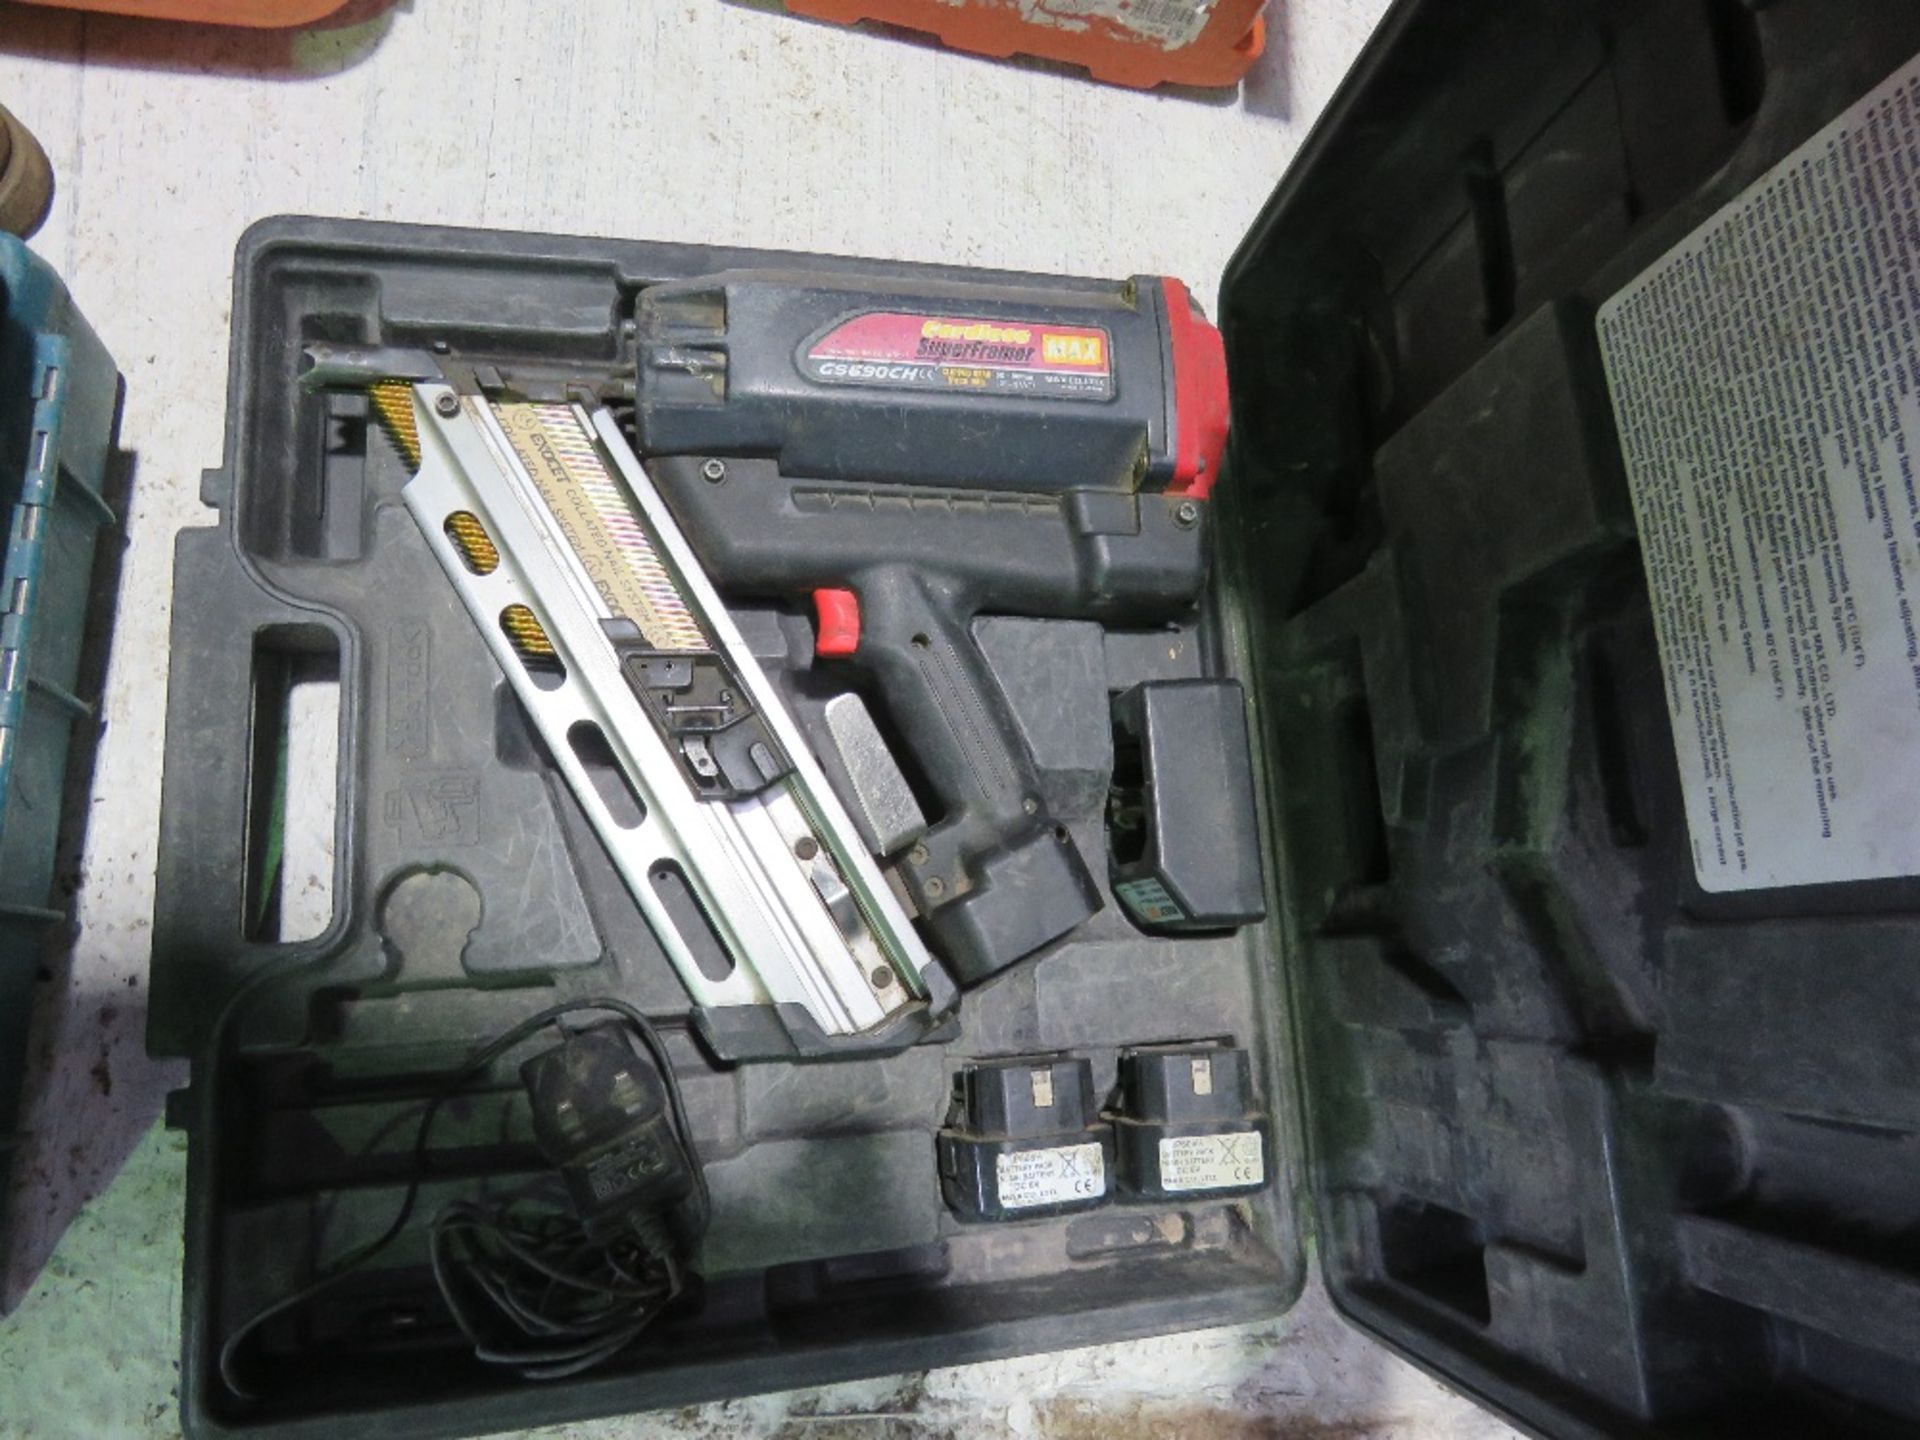 MAXPOWER NAIL GUN IN A CASE. ....THIS LOT IS SOLD UNDER THE AUCTIONEERS MARGIN SCHEME, THEREFORE NO - Bild 3 aus 3